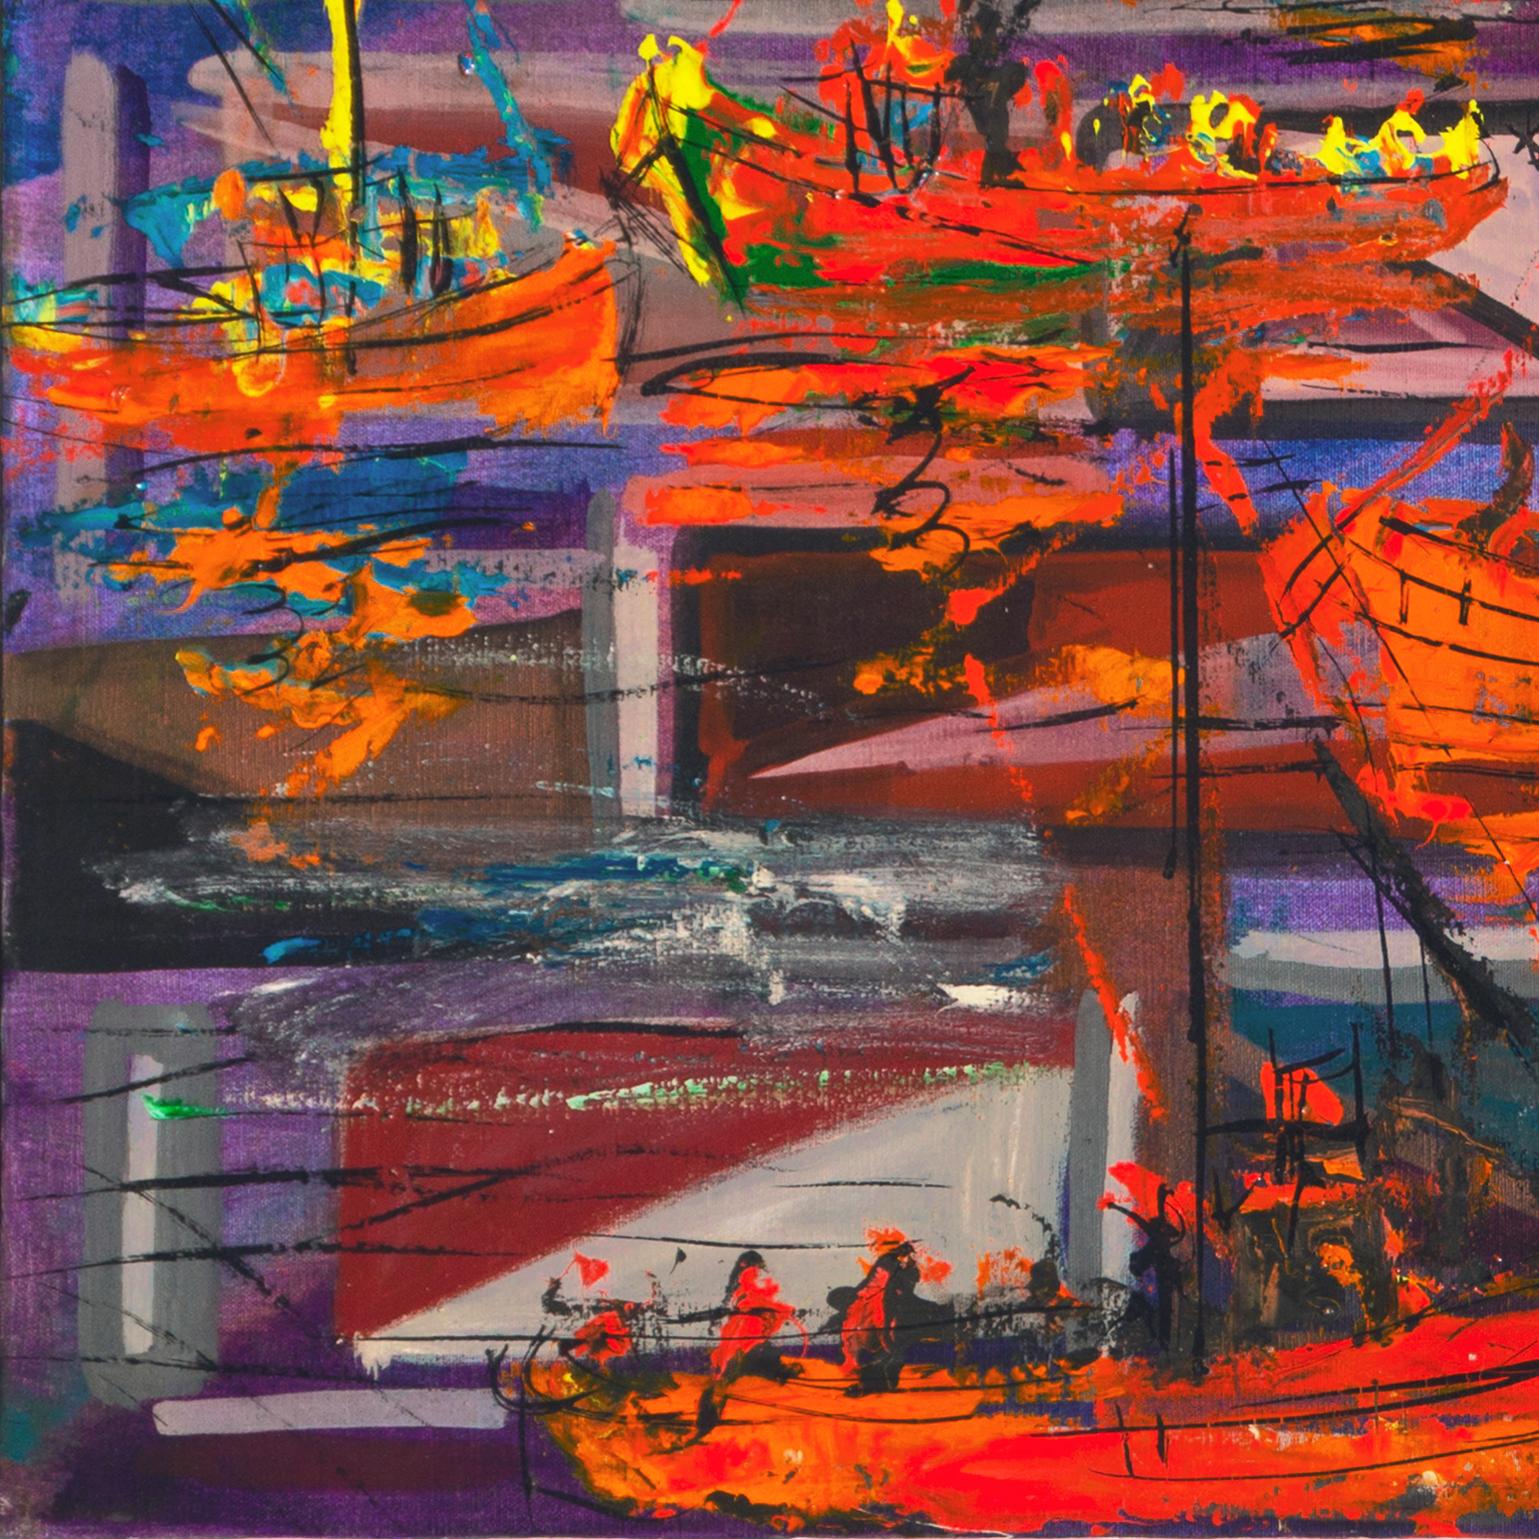 'Fishing Boats', Sausalito, North Beach, San Francisco Bay Area Expressionist - Post-Impressionist Painting by Pascal Cucaro